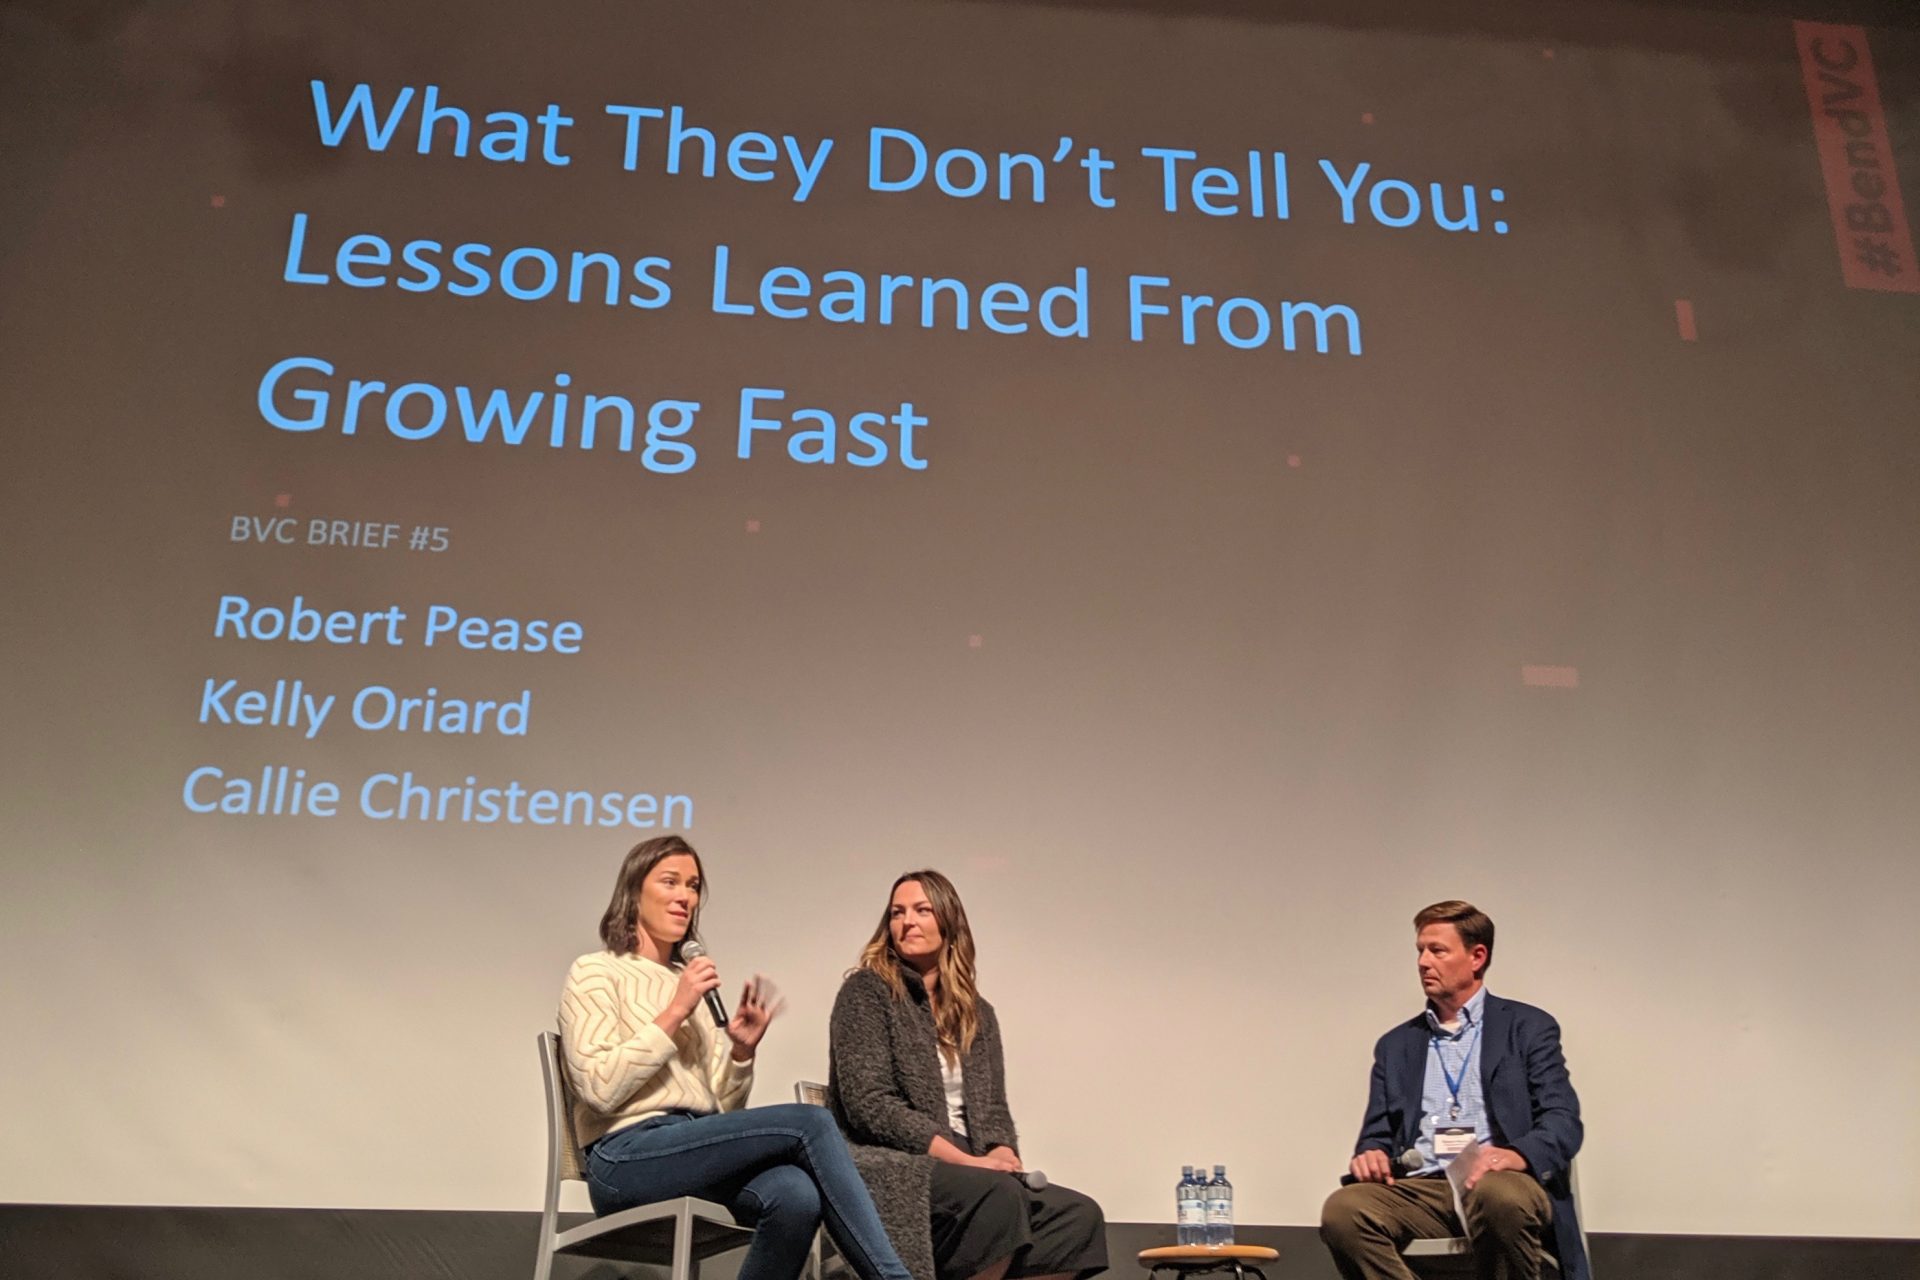 What they don't tell you: Lessons learned from growing fast